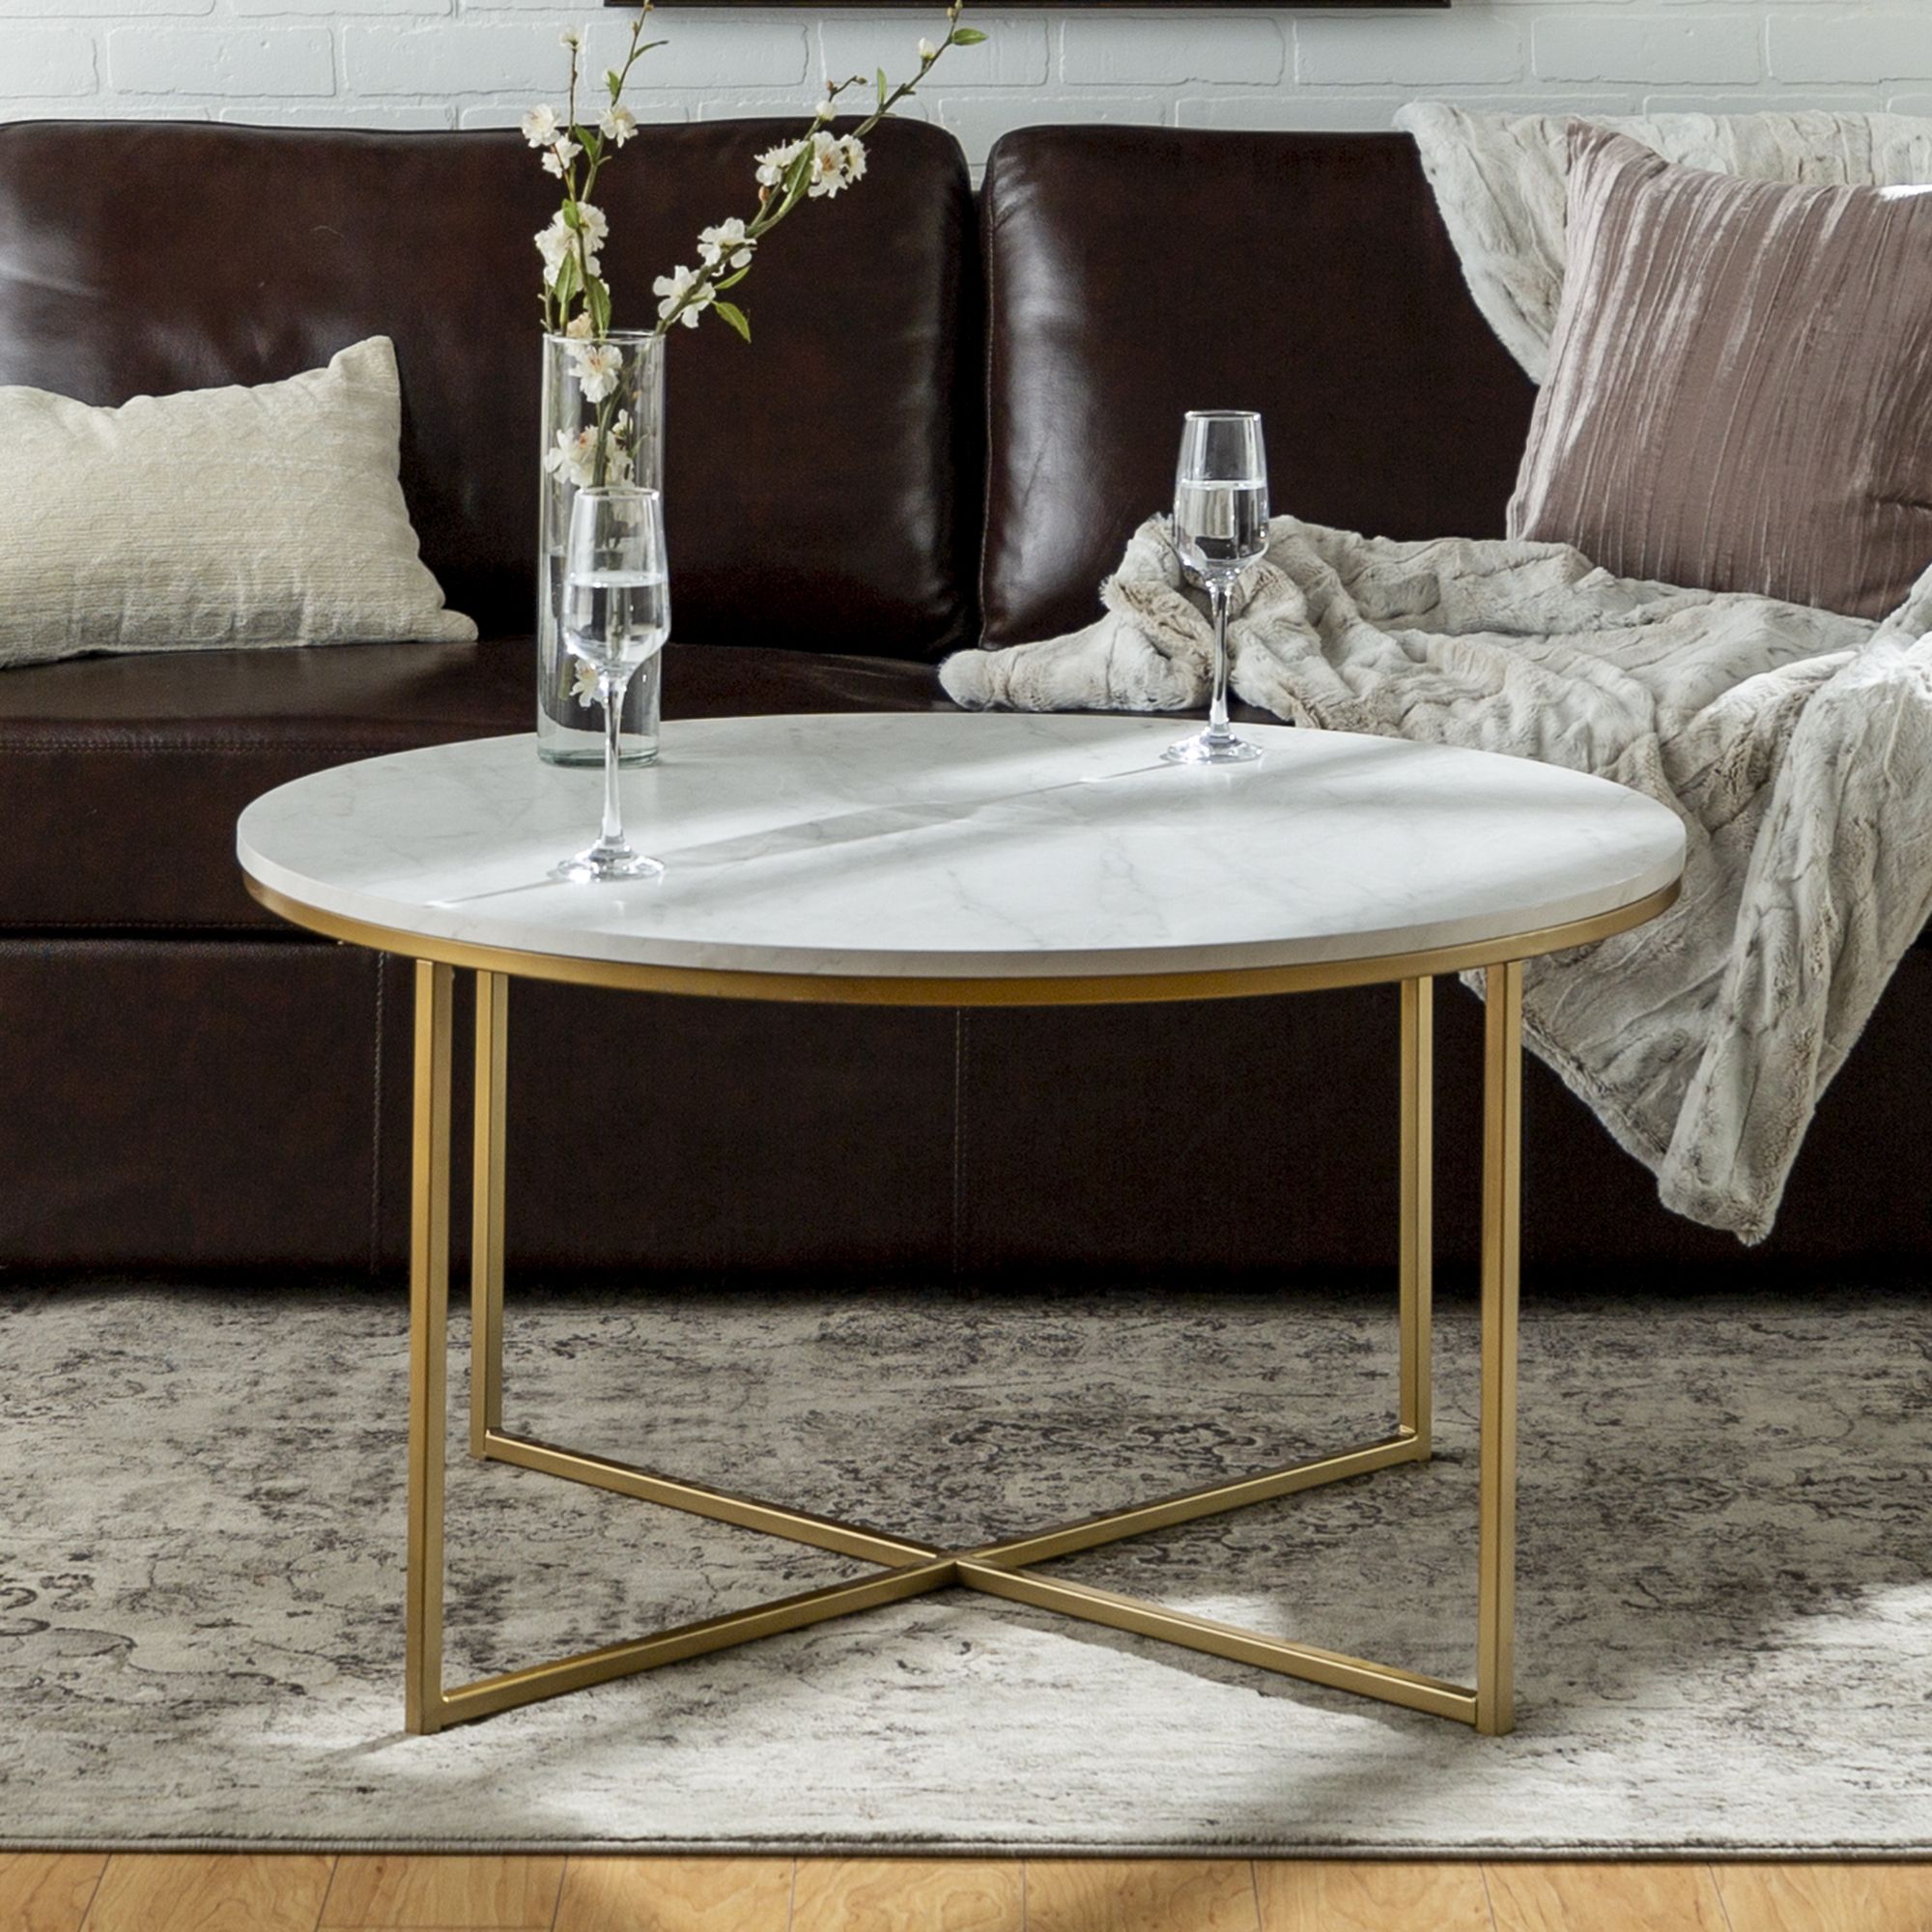 Ember Interiors Modern Round Coffee Table, Faux White Marble/gold –  Walmart Regarding White Faux Marble Coffee Tables (View 14 of 20)